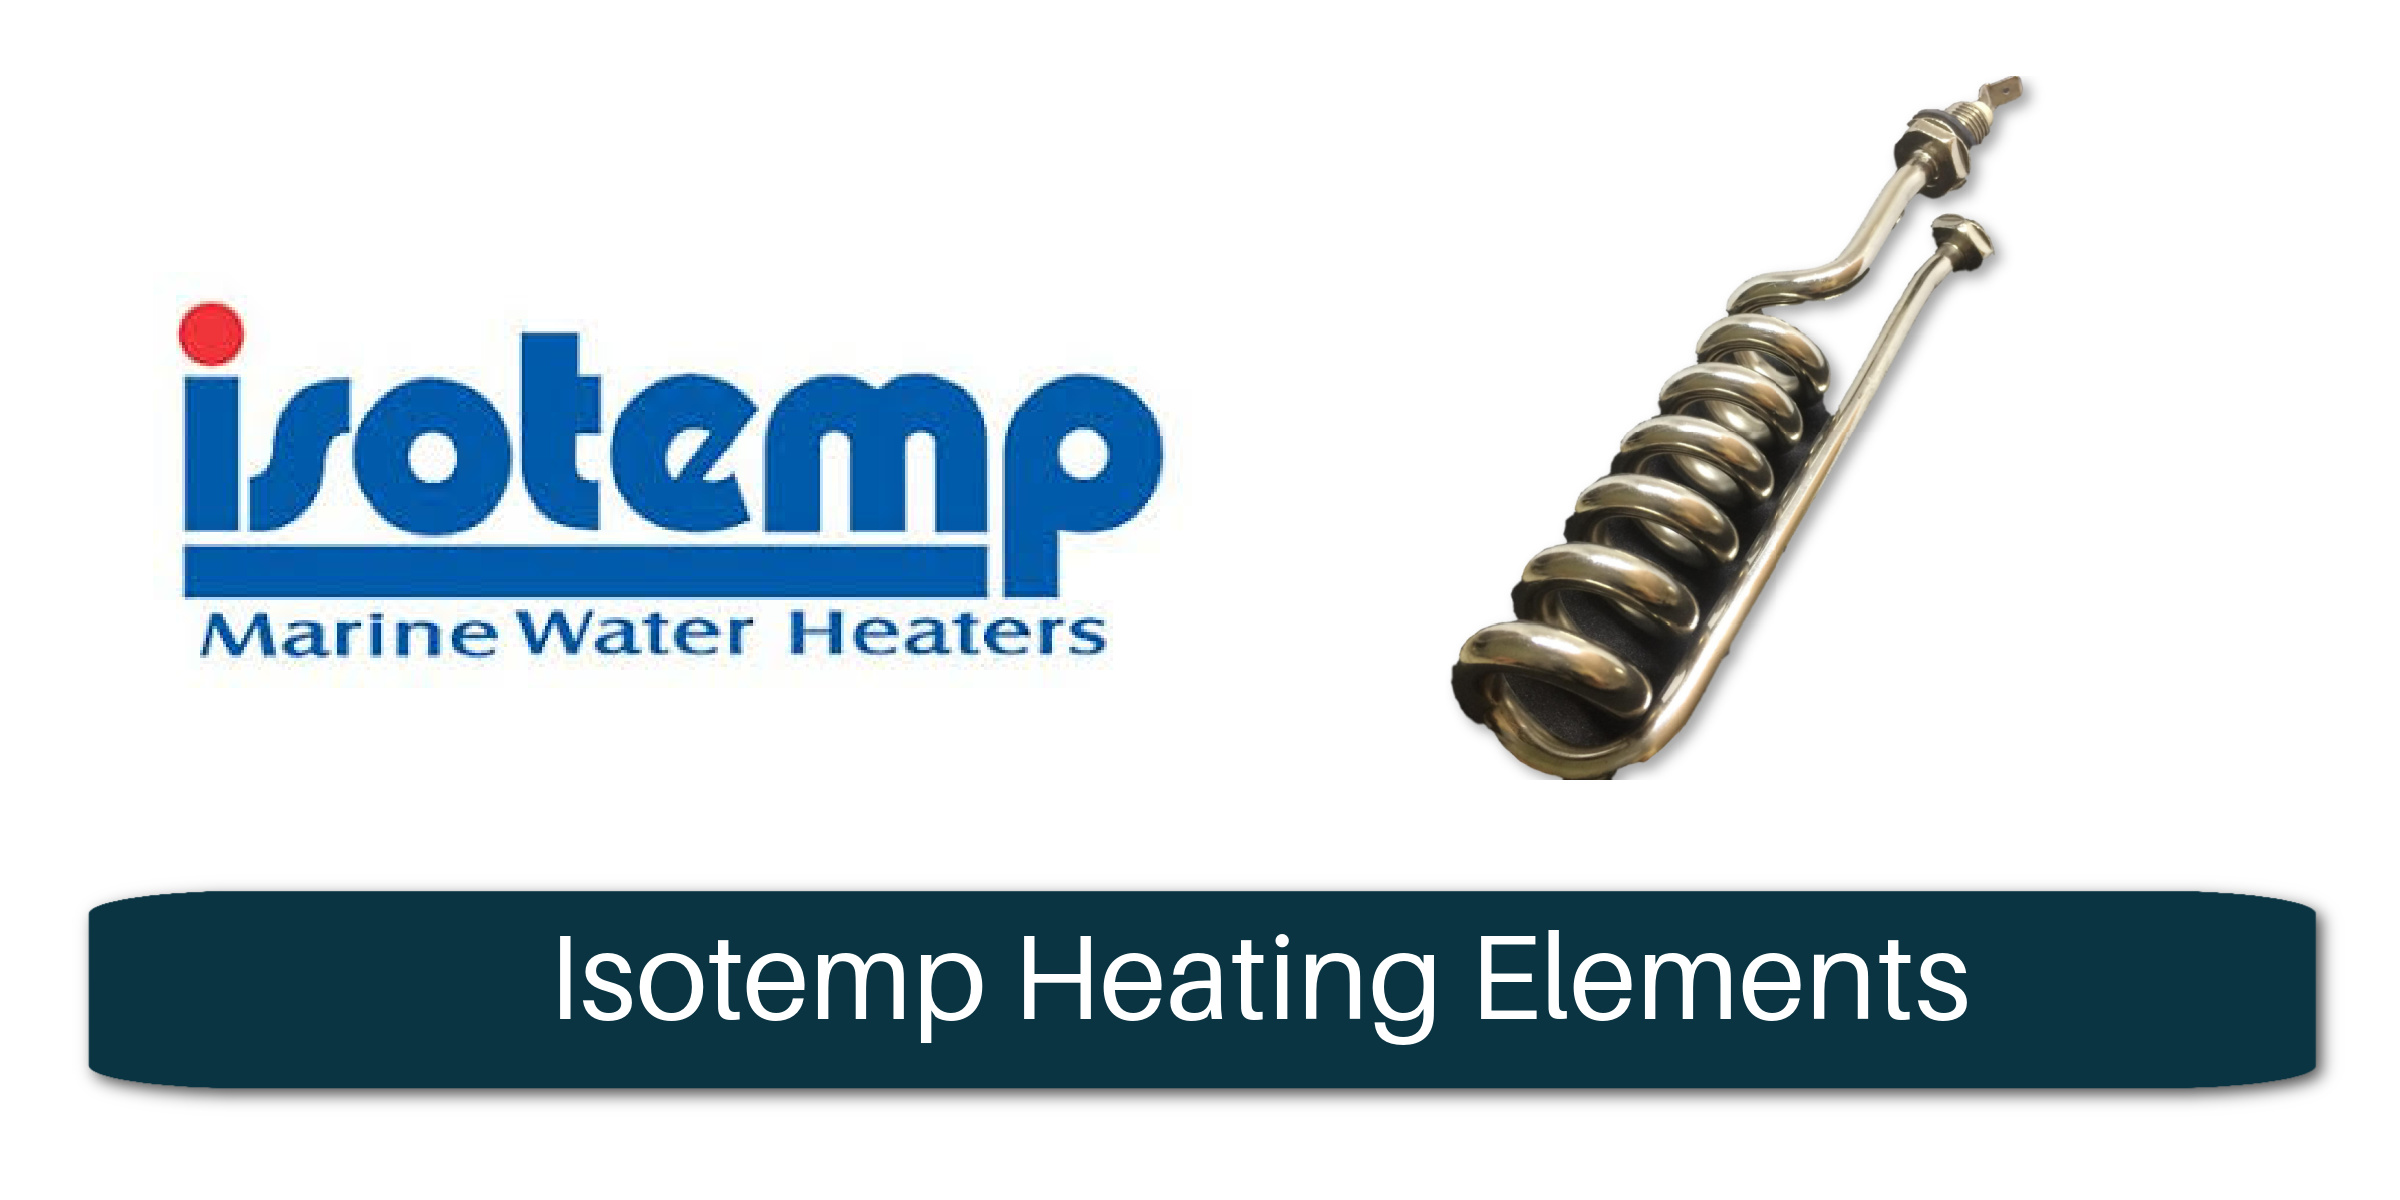 Isotemp Heating Elements